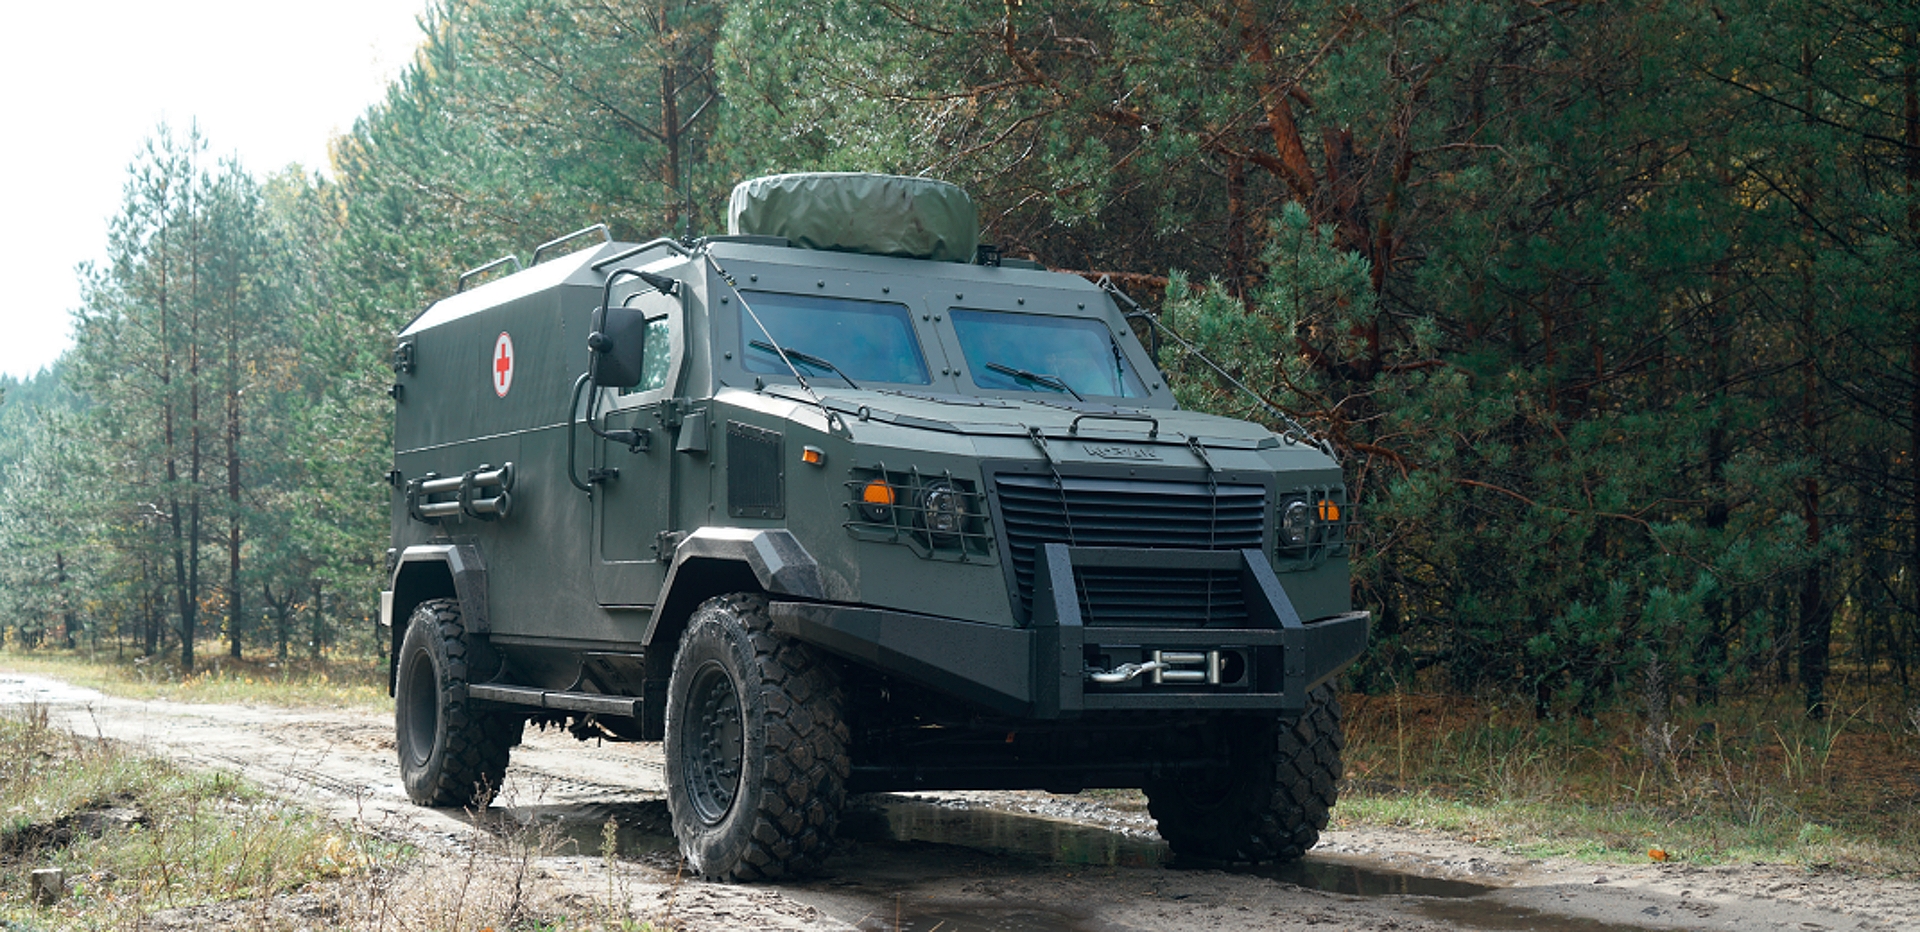 The Ministry of Defense has codified the domestically produced medical armored vehicle Kozak-5MED